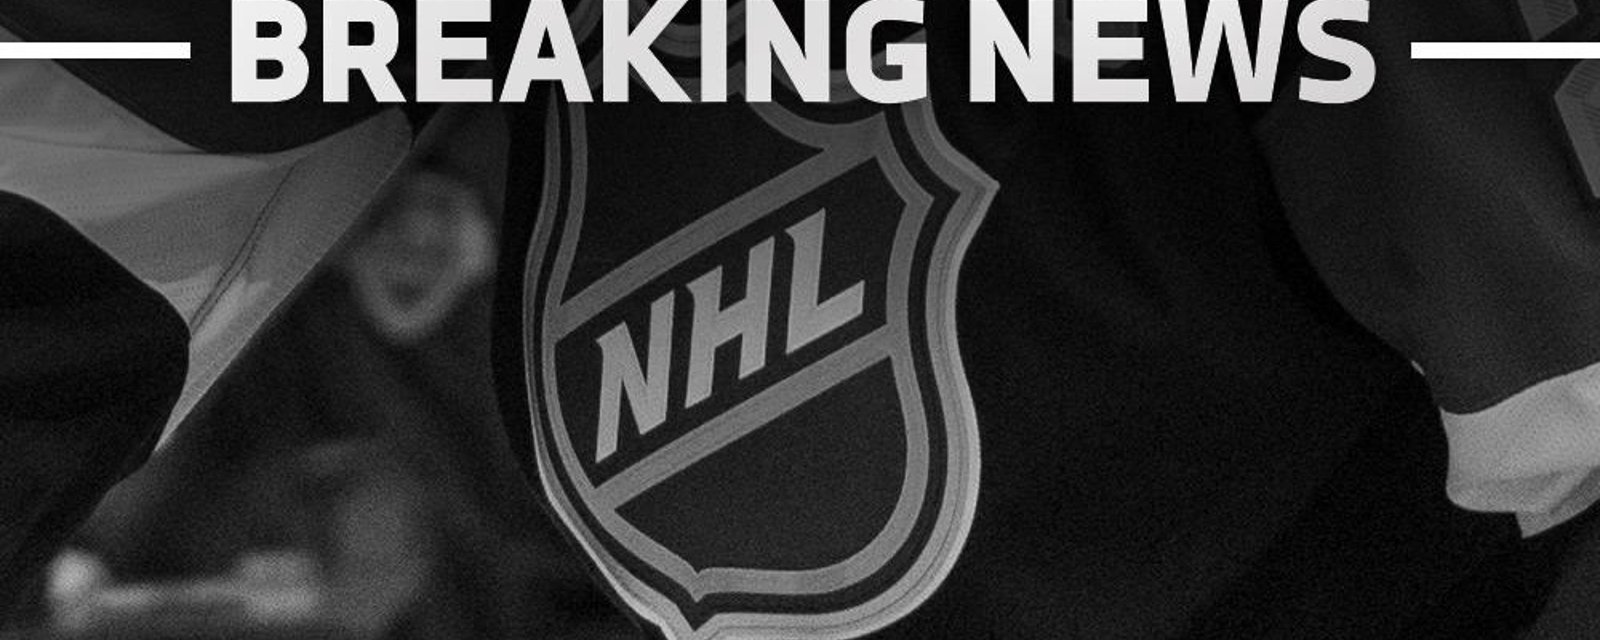 A second NHL player has tested positive for COVID-19.